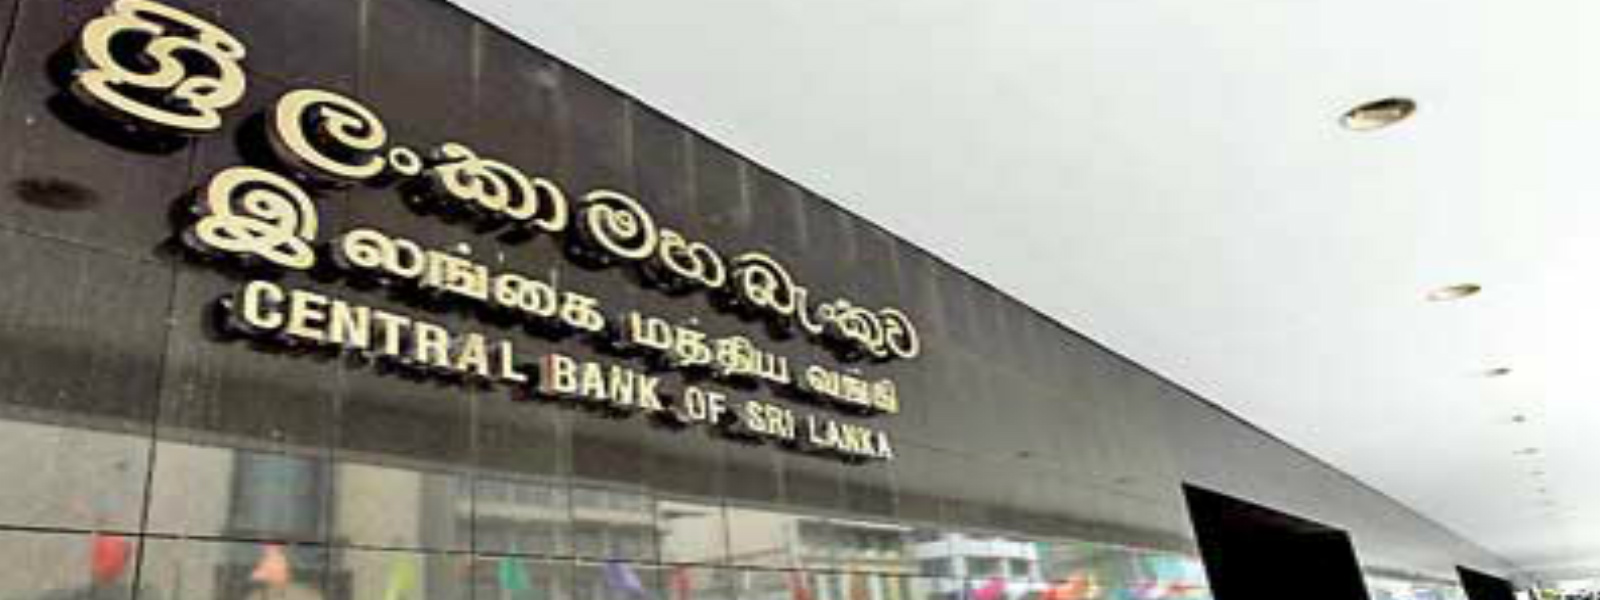 SL to achieve growth rate between 3.5 - 4% in 2020